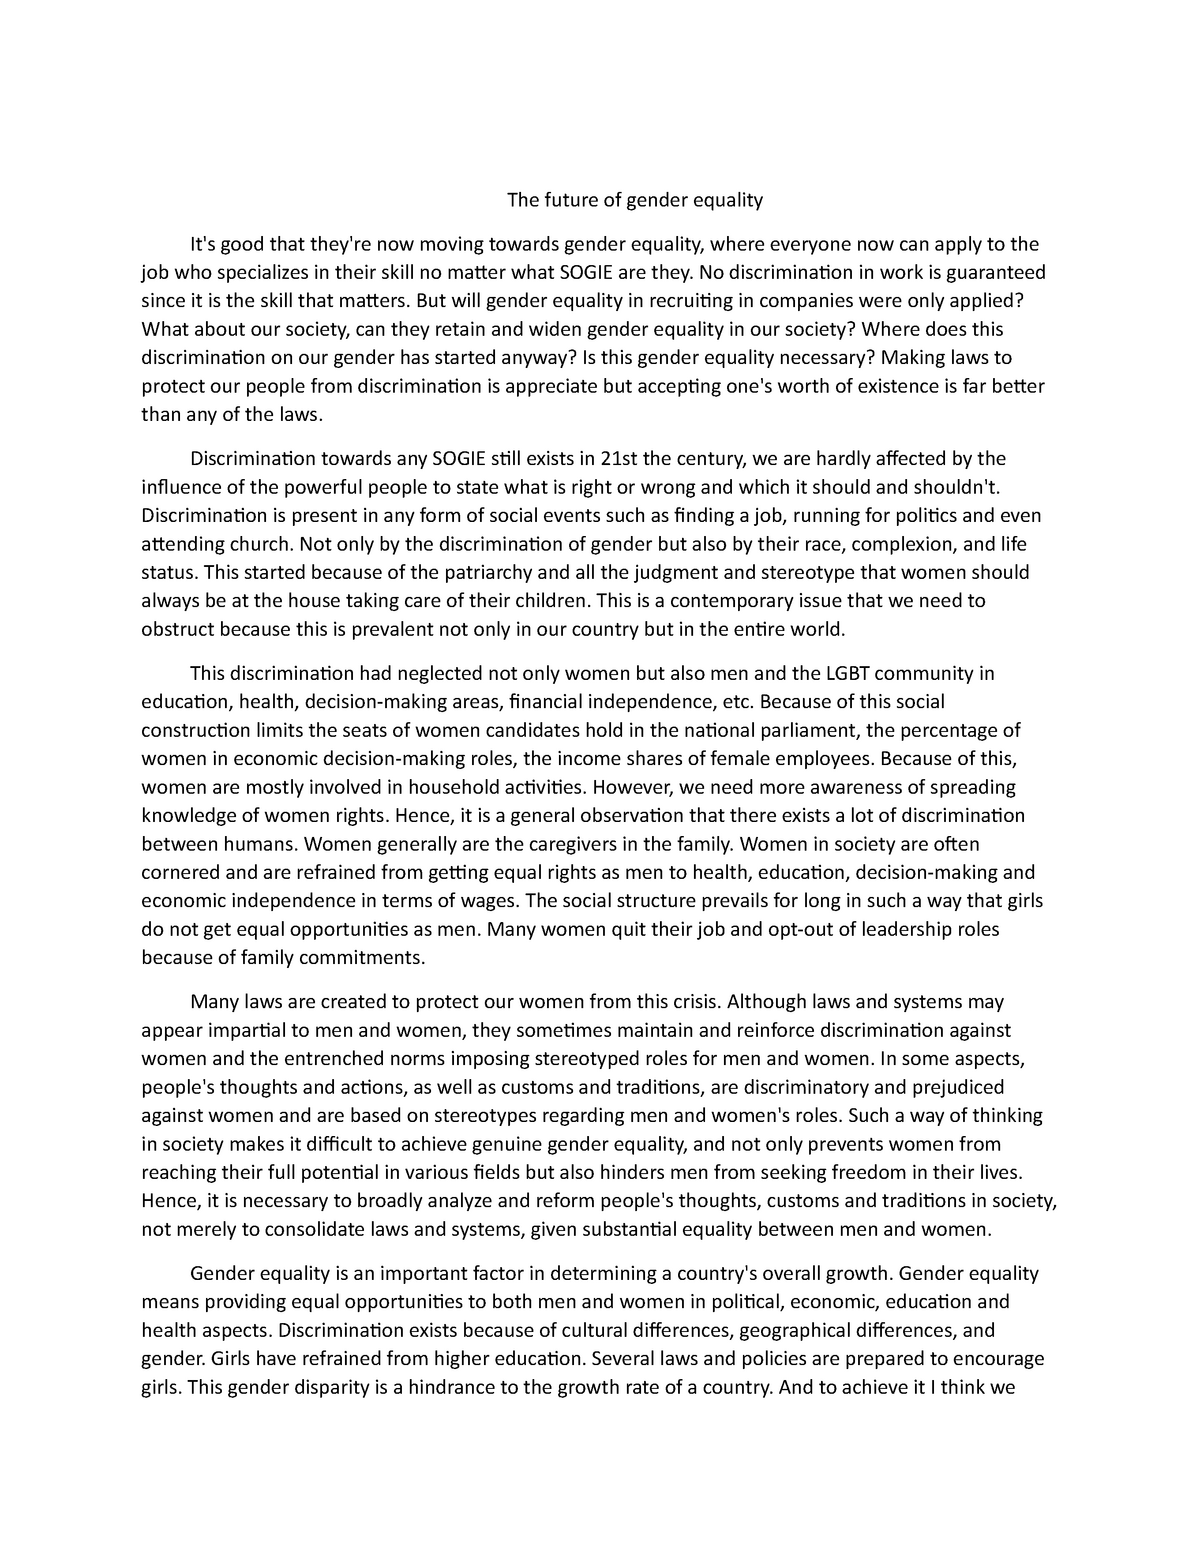 the future gender equality essay with conclusion